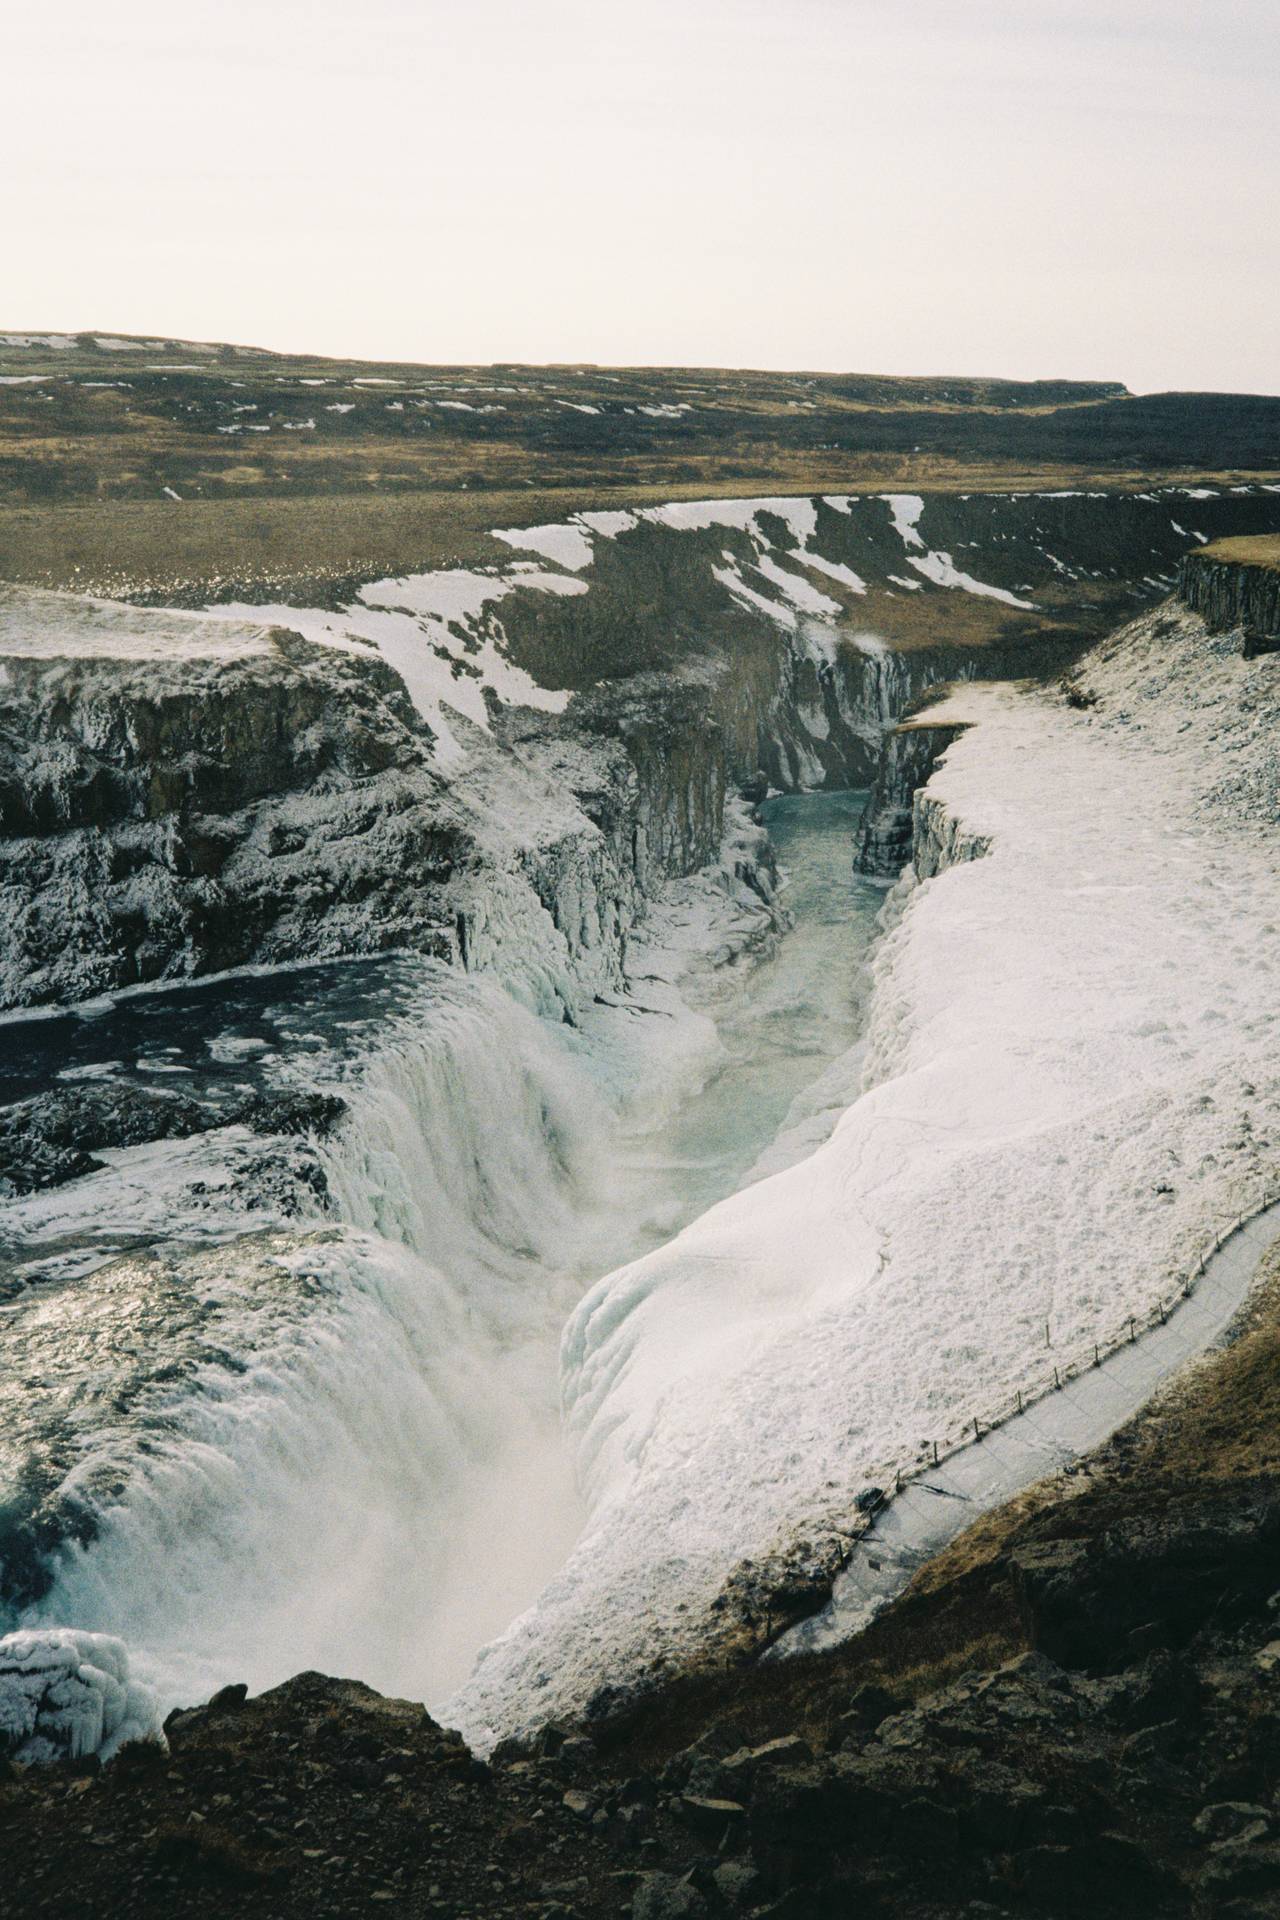 Another photograph of Gullfoss, from a different angle